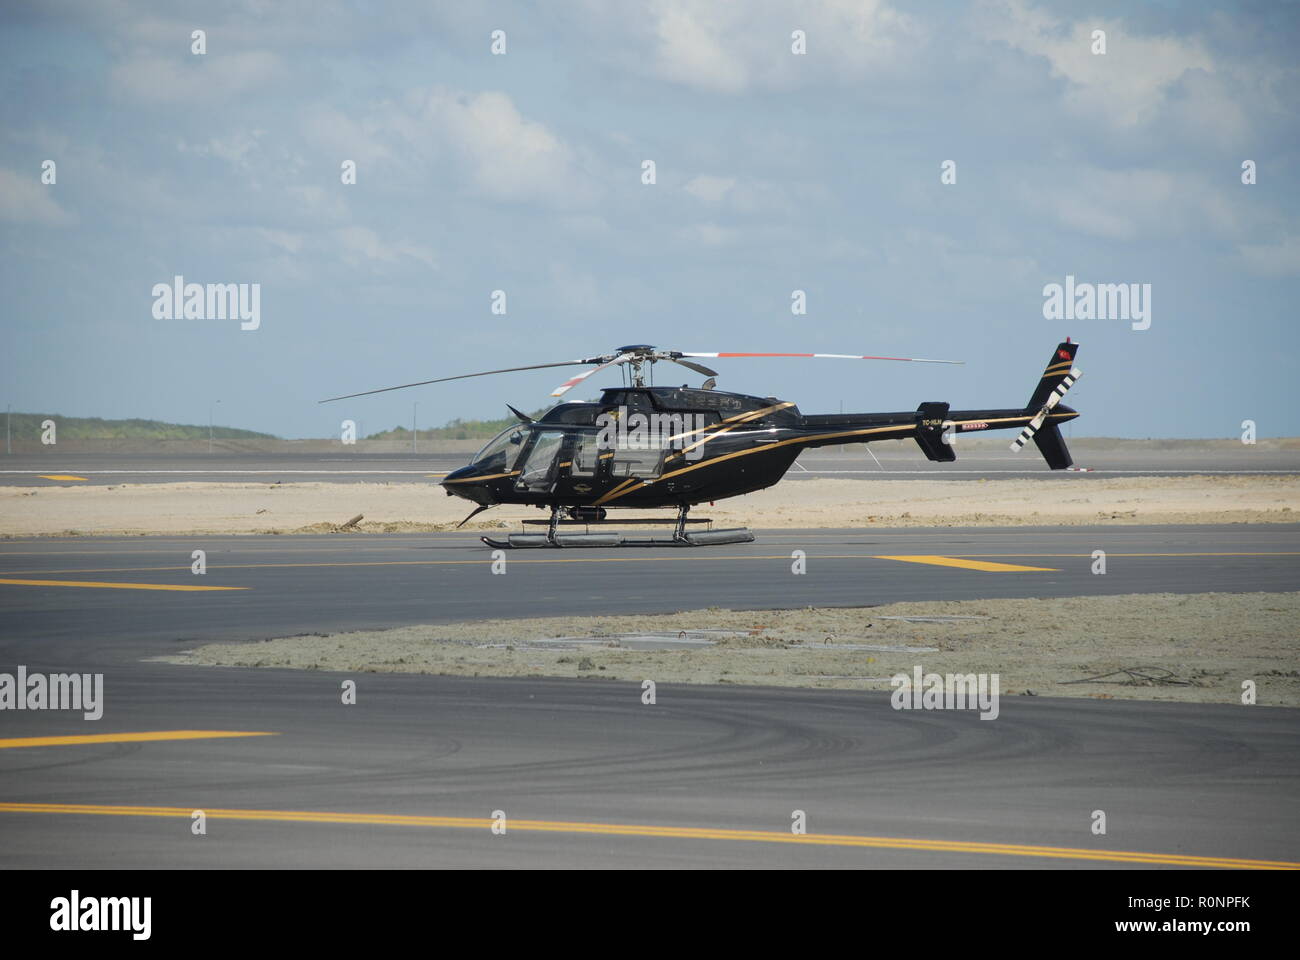 Istanbul, TURKEY – September 20, 2018: Genel Aviation Company's Bell 407 helicopter (TC-HLN) standing on the ground at the new Istanbul Airport before Stock Photo